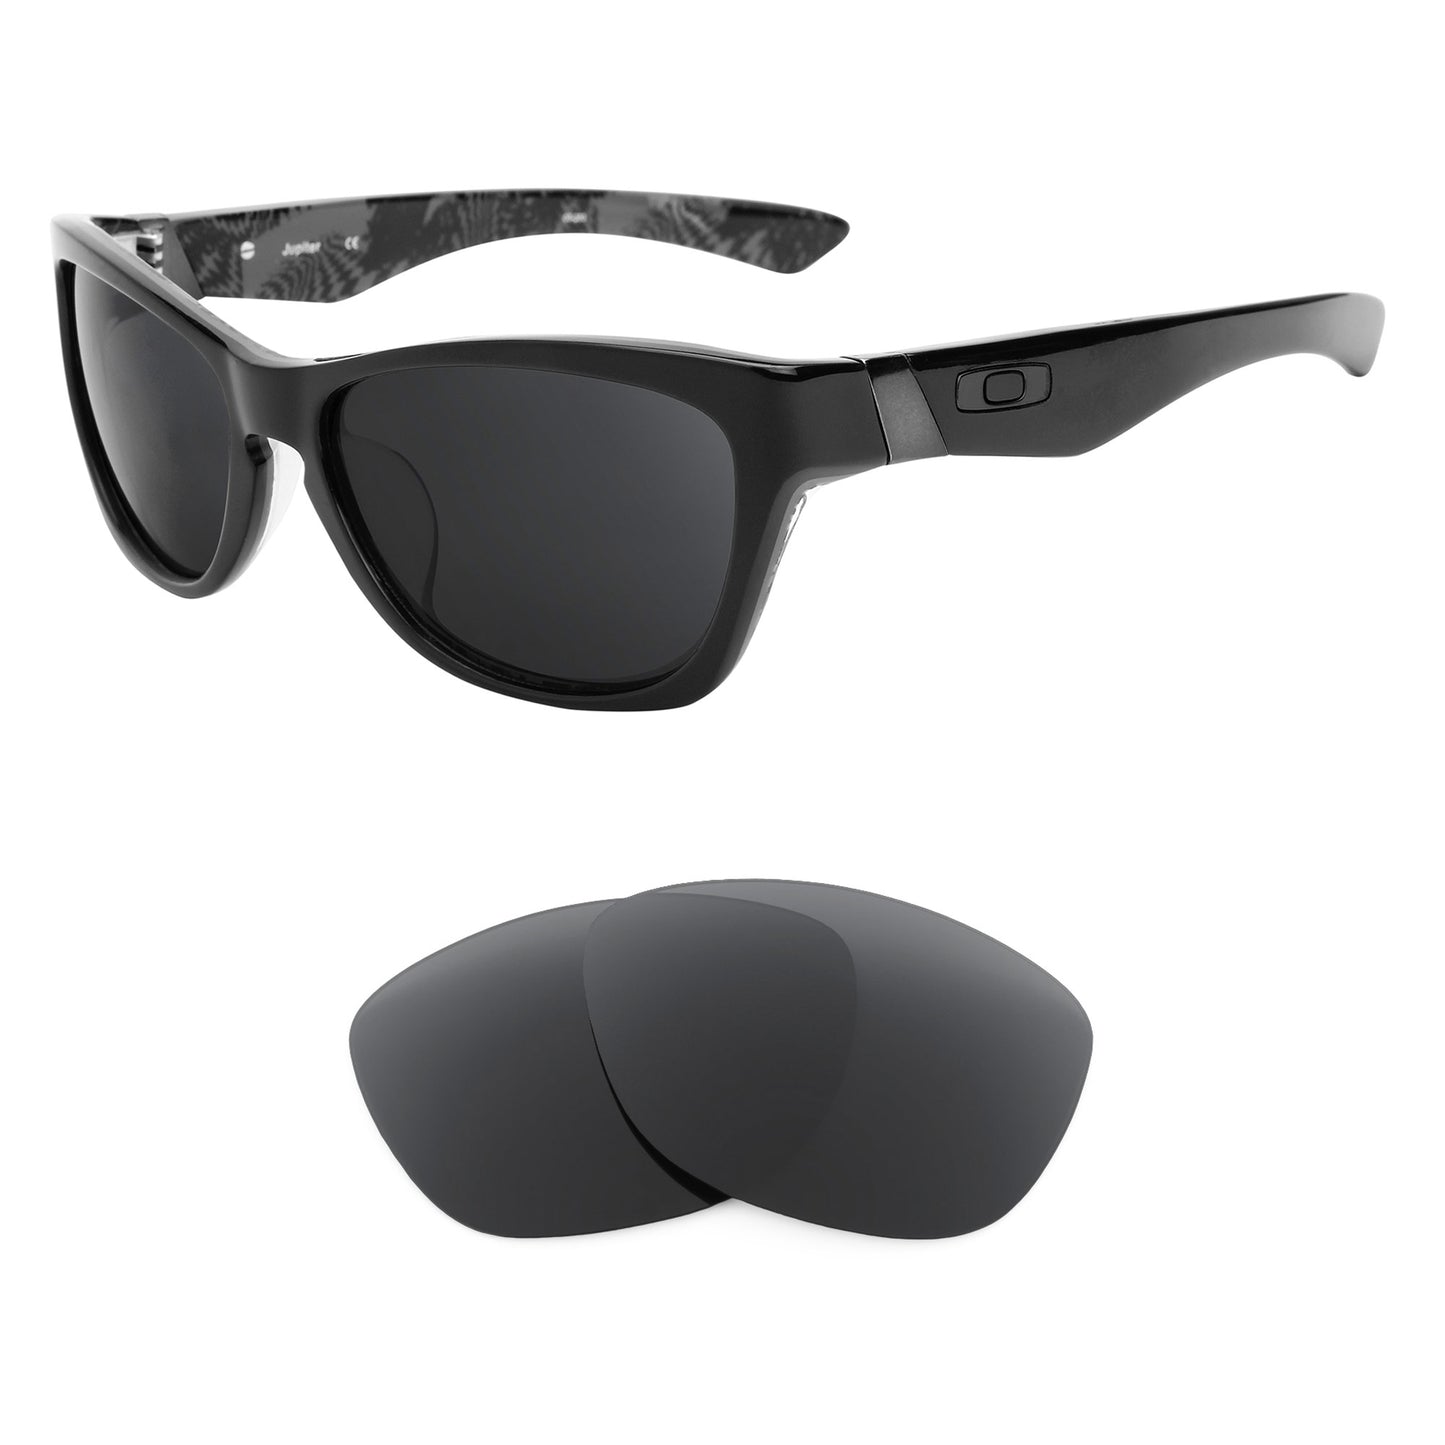 Oakley Jupiter LX sunglasses with replacement lenses